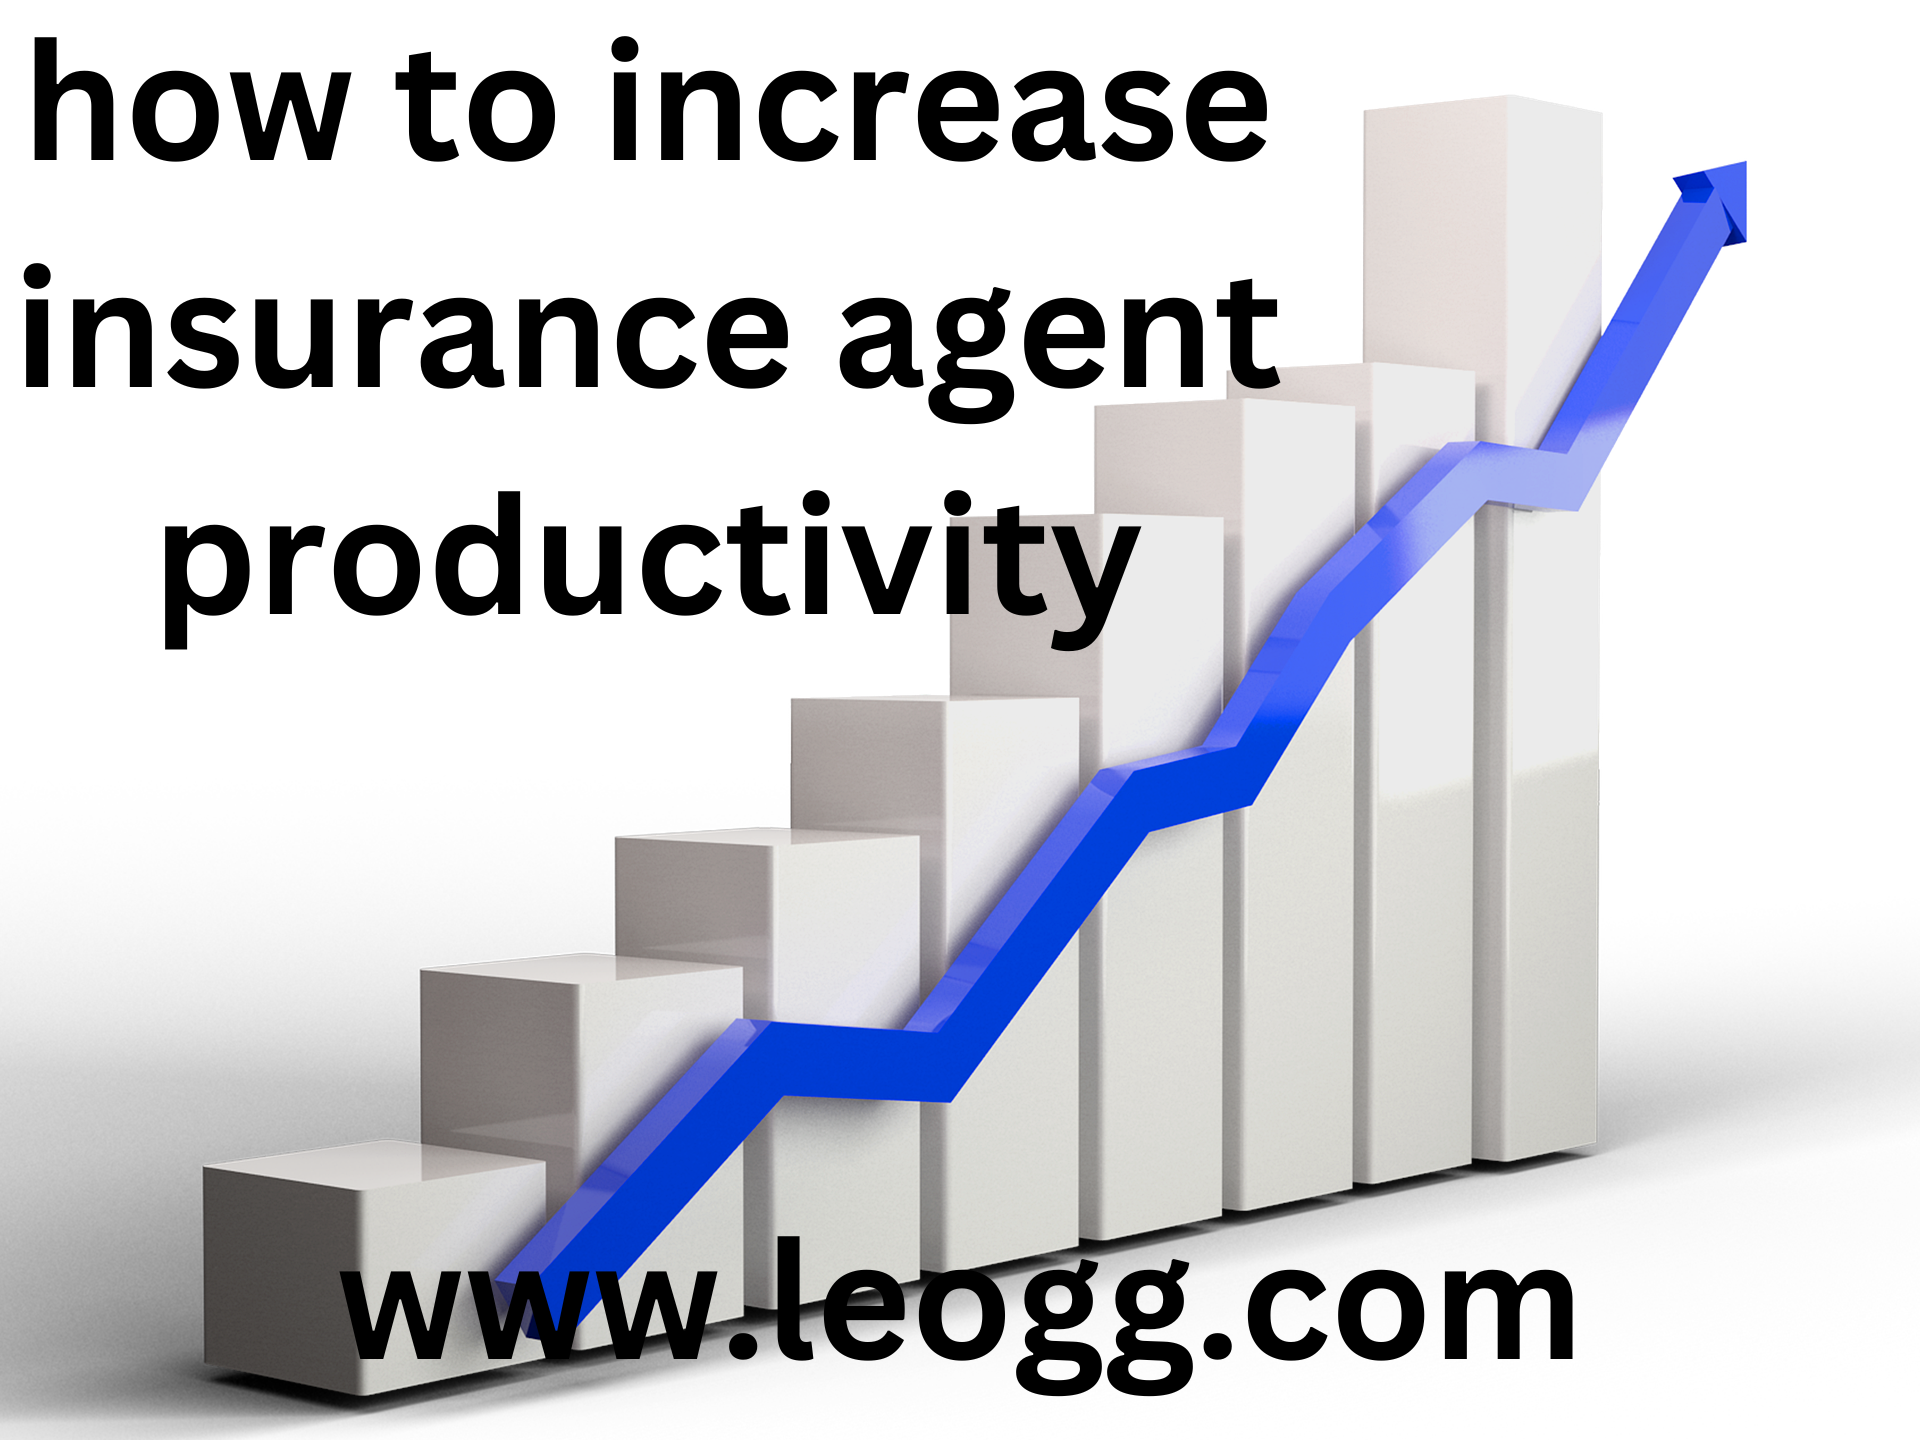 how to increase insurance agent productivity